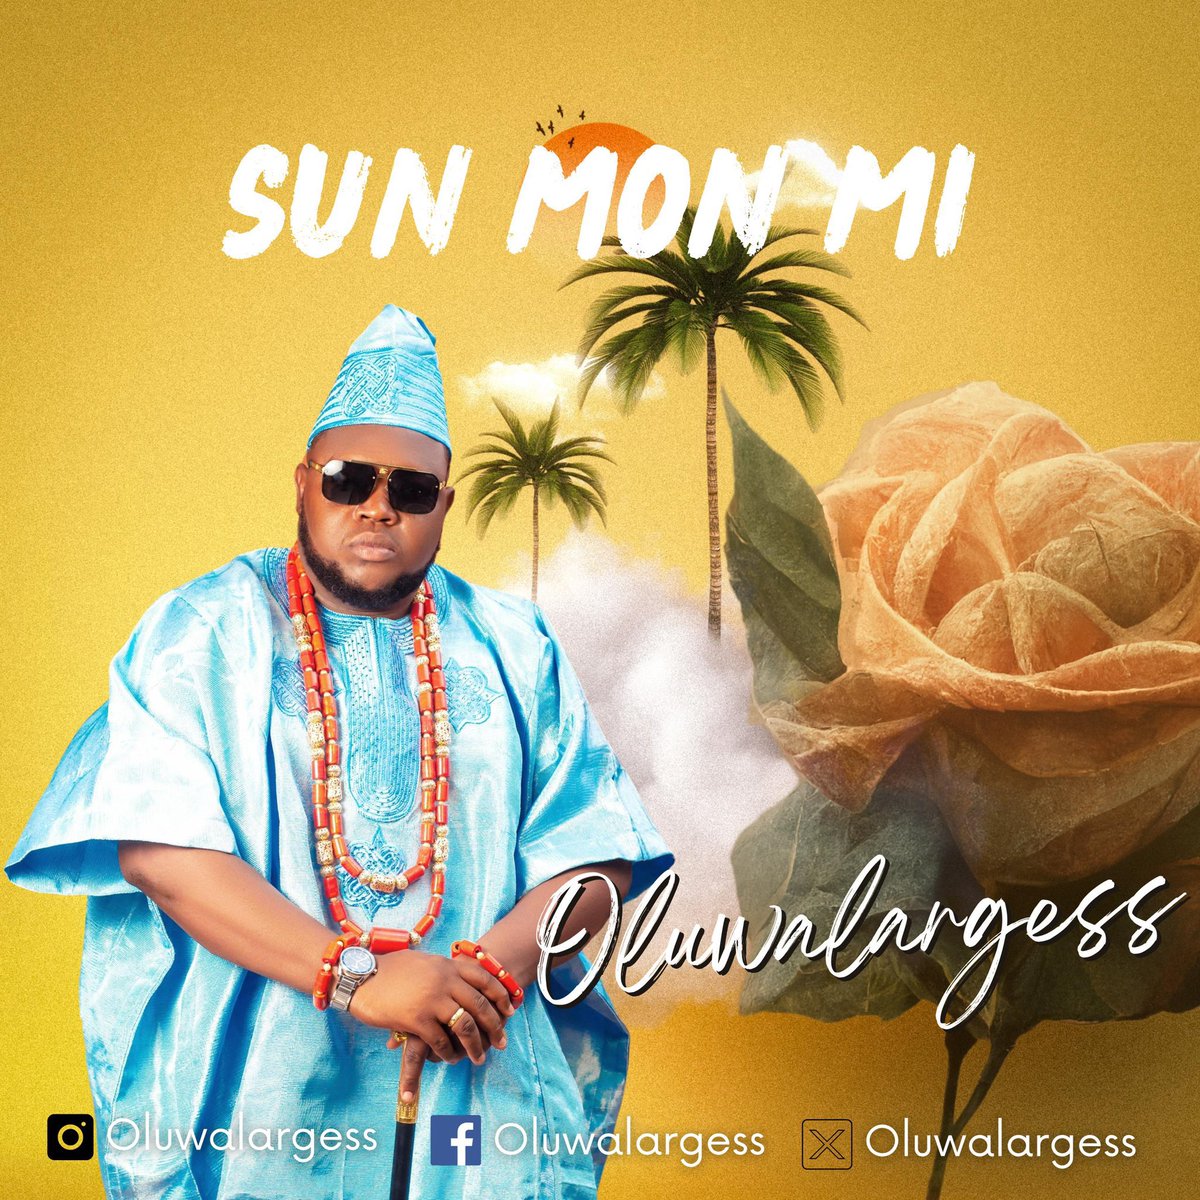 Lot of hardwork is put into this 🙌🏽🙌🏽🙌🏽🙌🏽 Please listen with your head sets/airpods and so on …. Produced/mixed/mastered by @iamunBEATen 1 of 2 songwhip.com/largess/sun-mo… Kindly stream guys 💃🏿💃🏿 #SUNMOMI